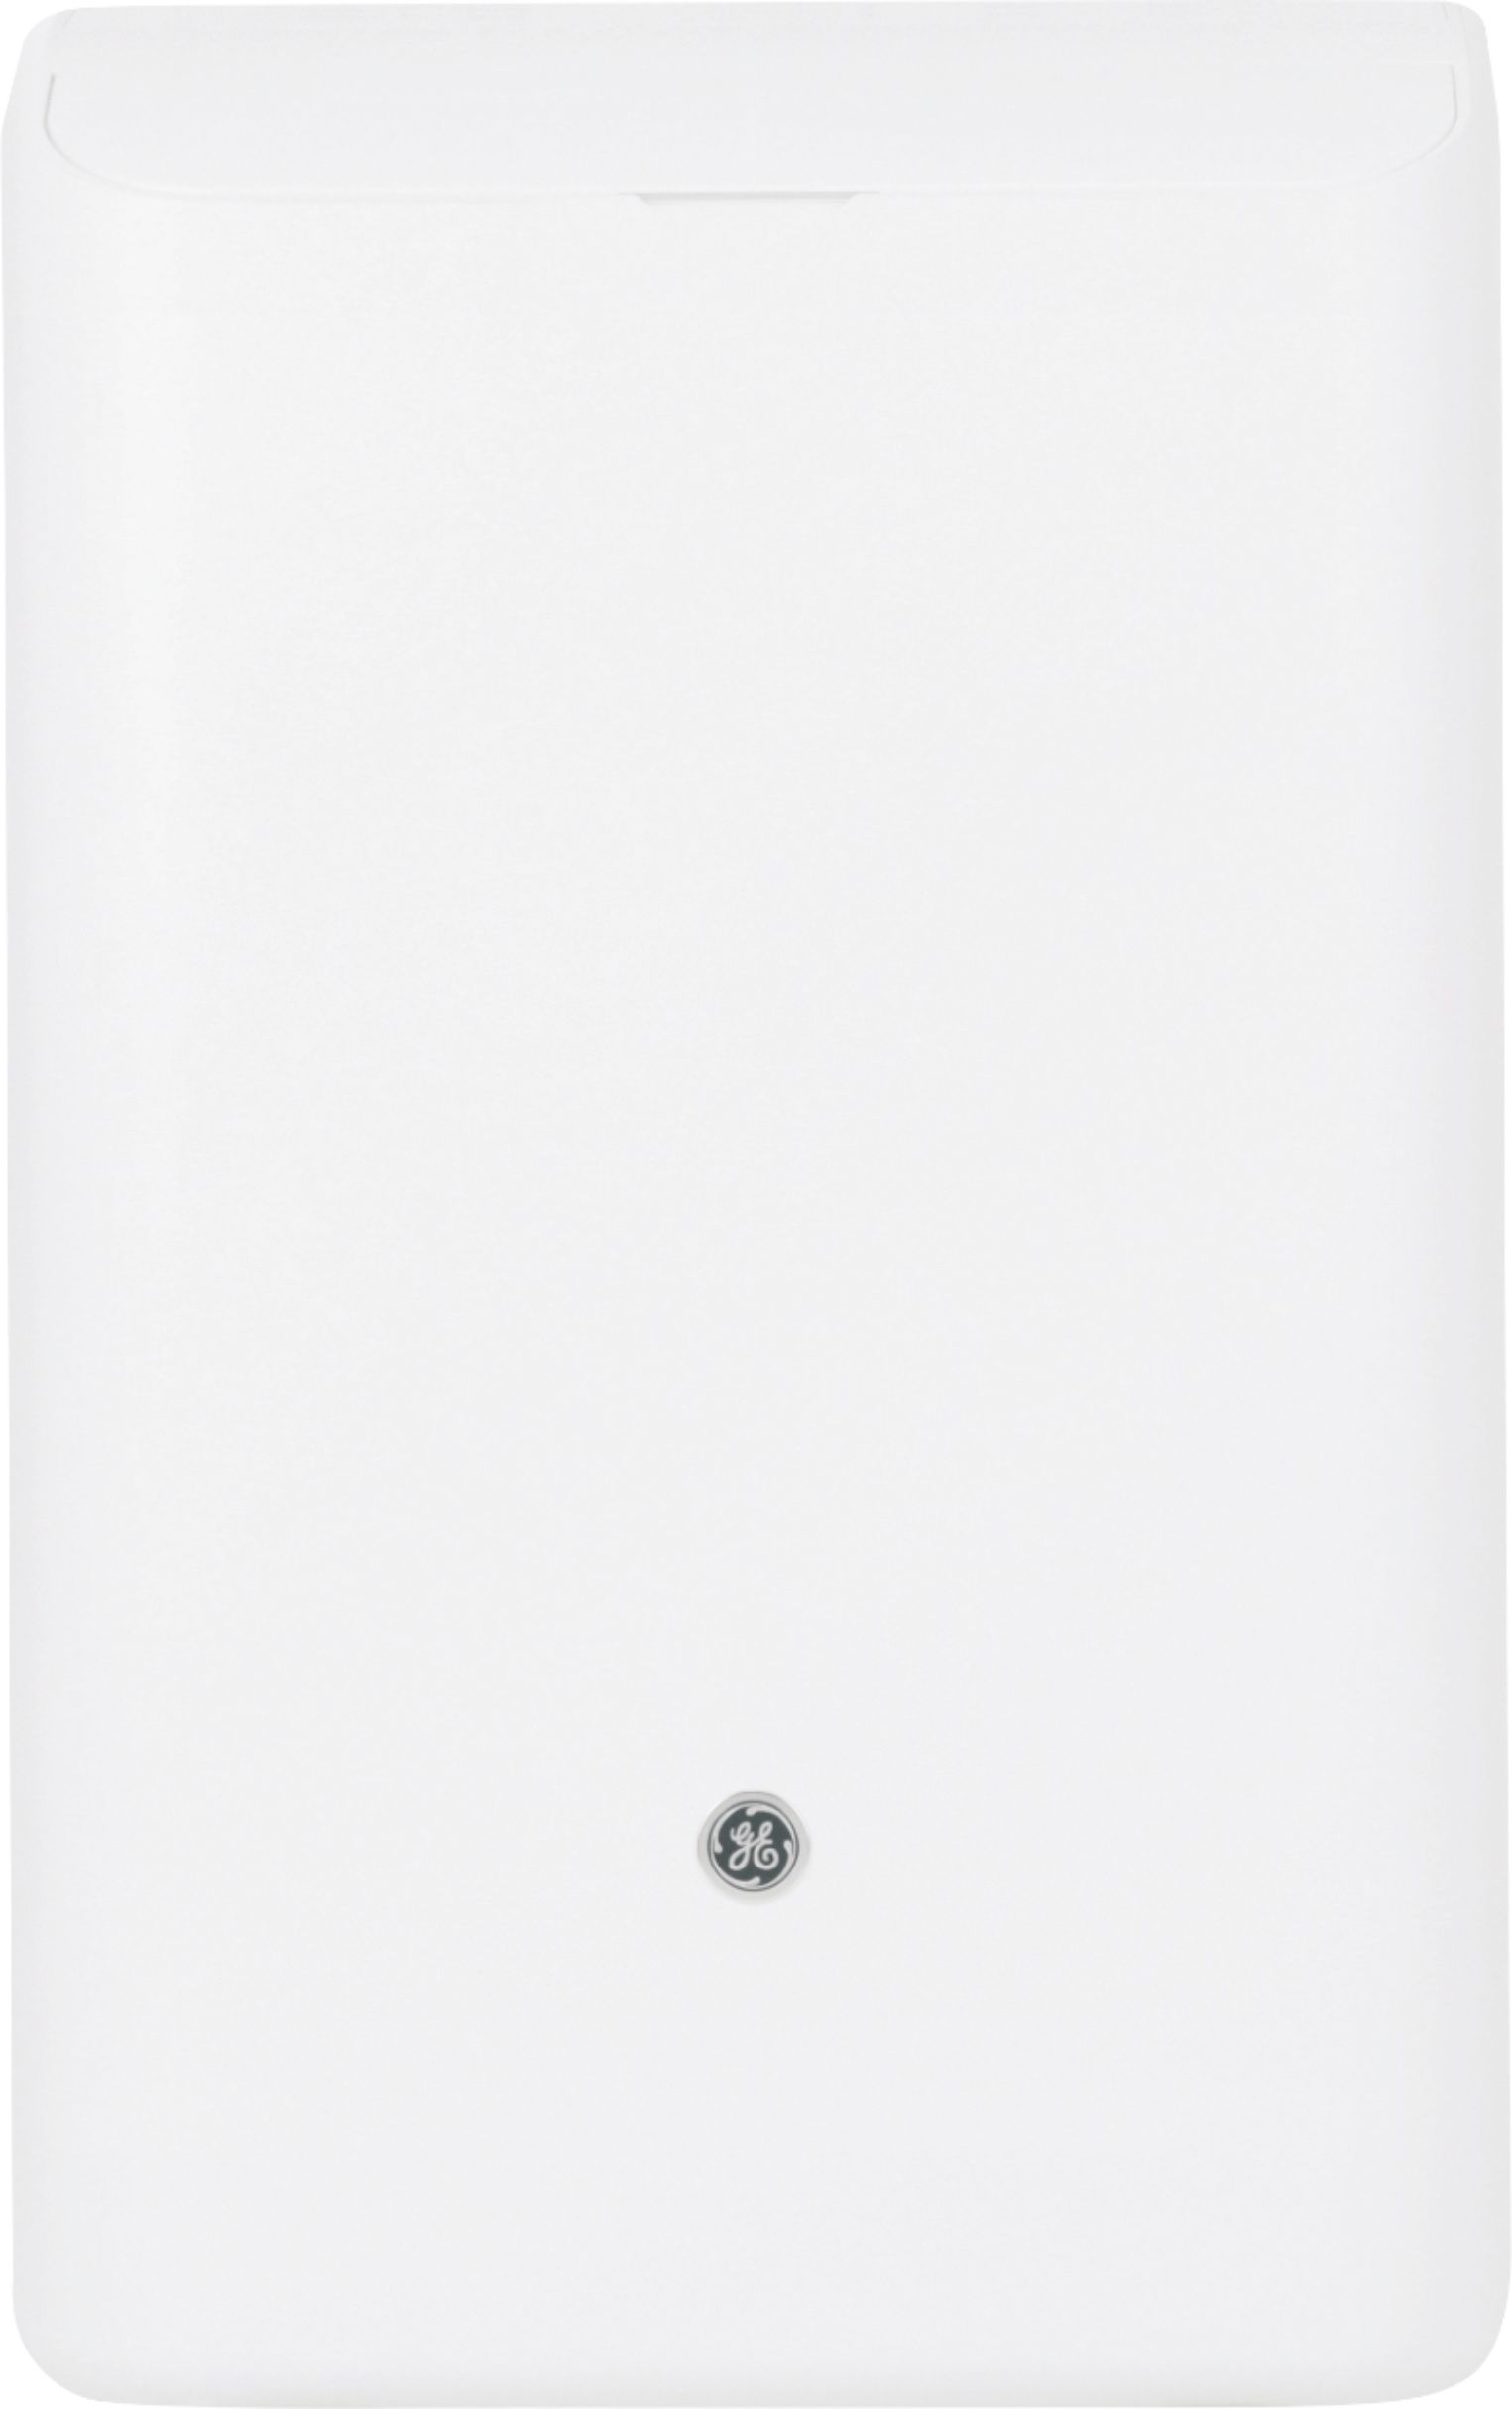 Best Buy: GE 250 Sq. Ft. Portable Air Conditioner White APCA09YZBW